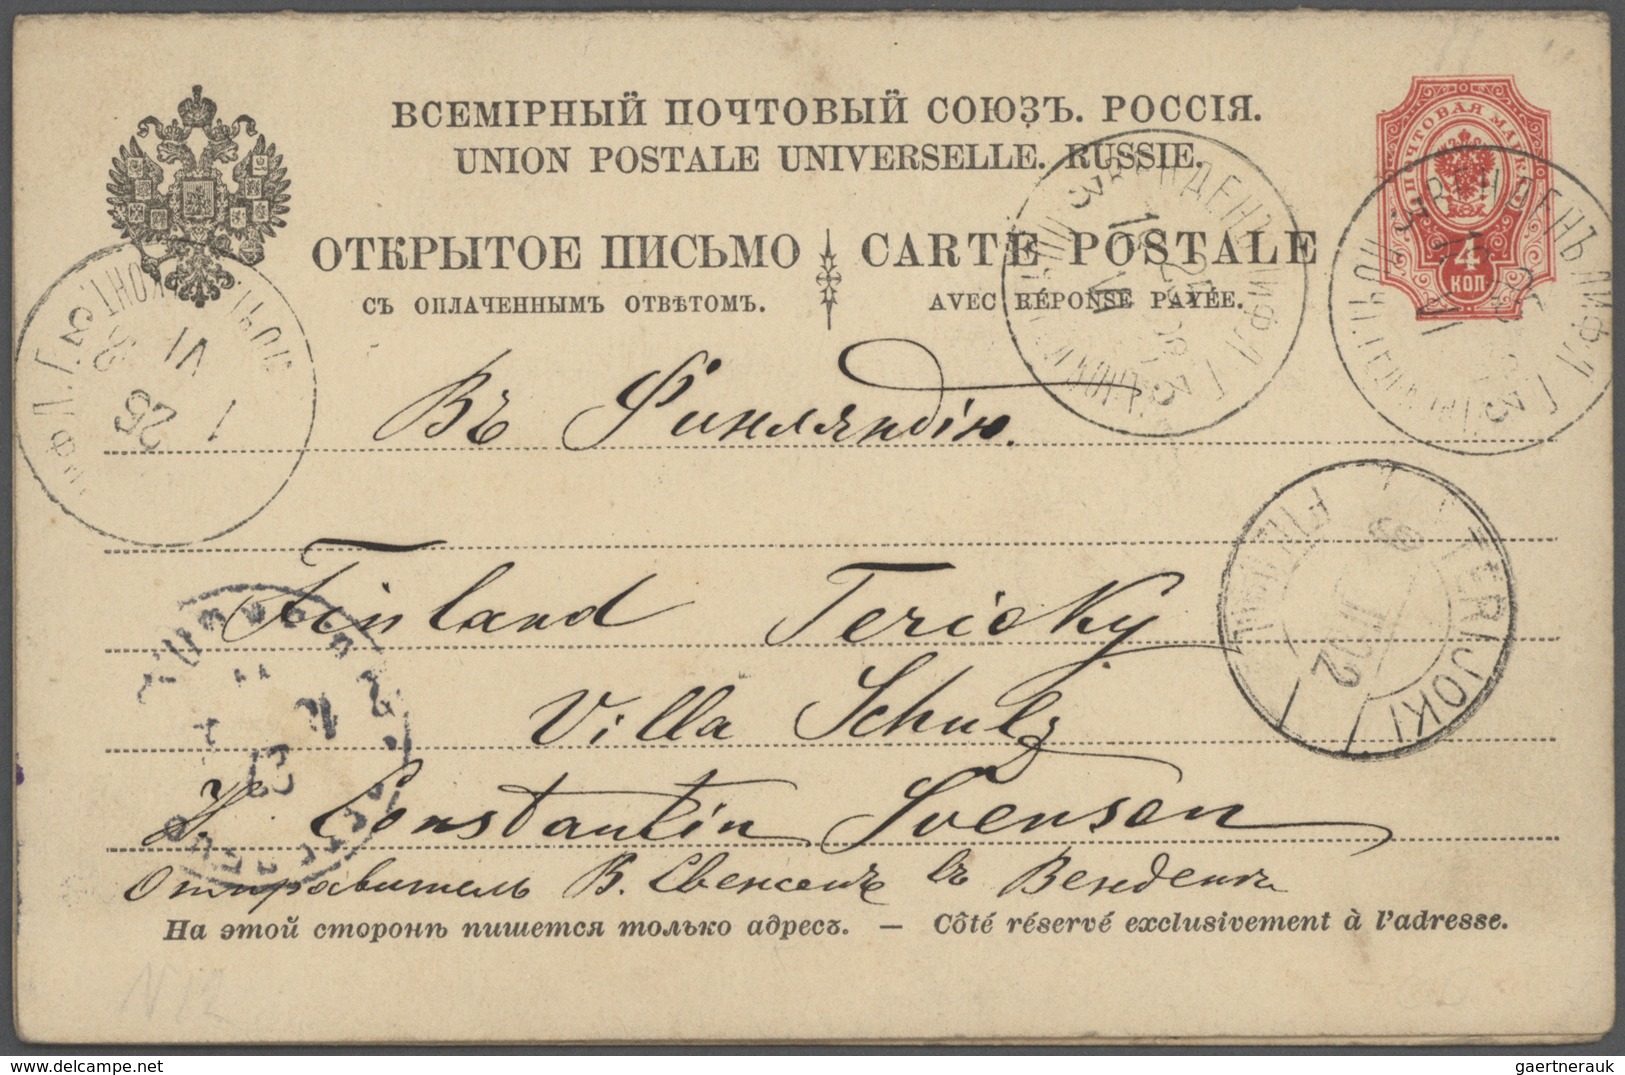 Russland - Ganzsachen: 1864/1918, collection of 64 entires, mainly used stationeries incl. money ord